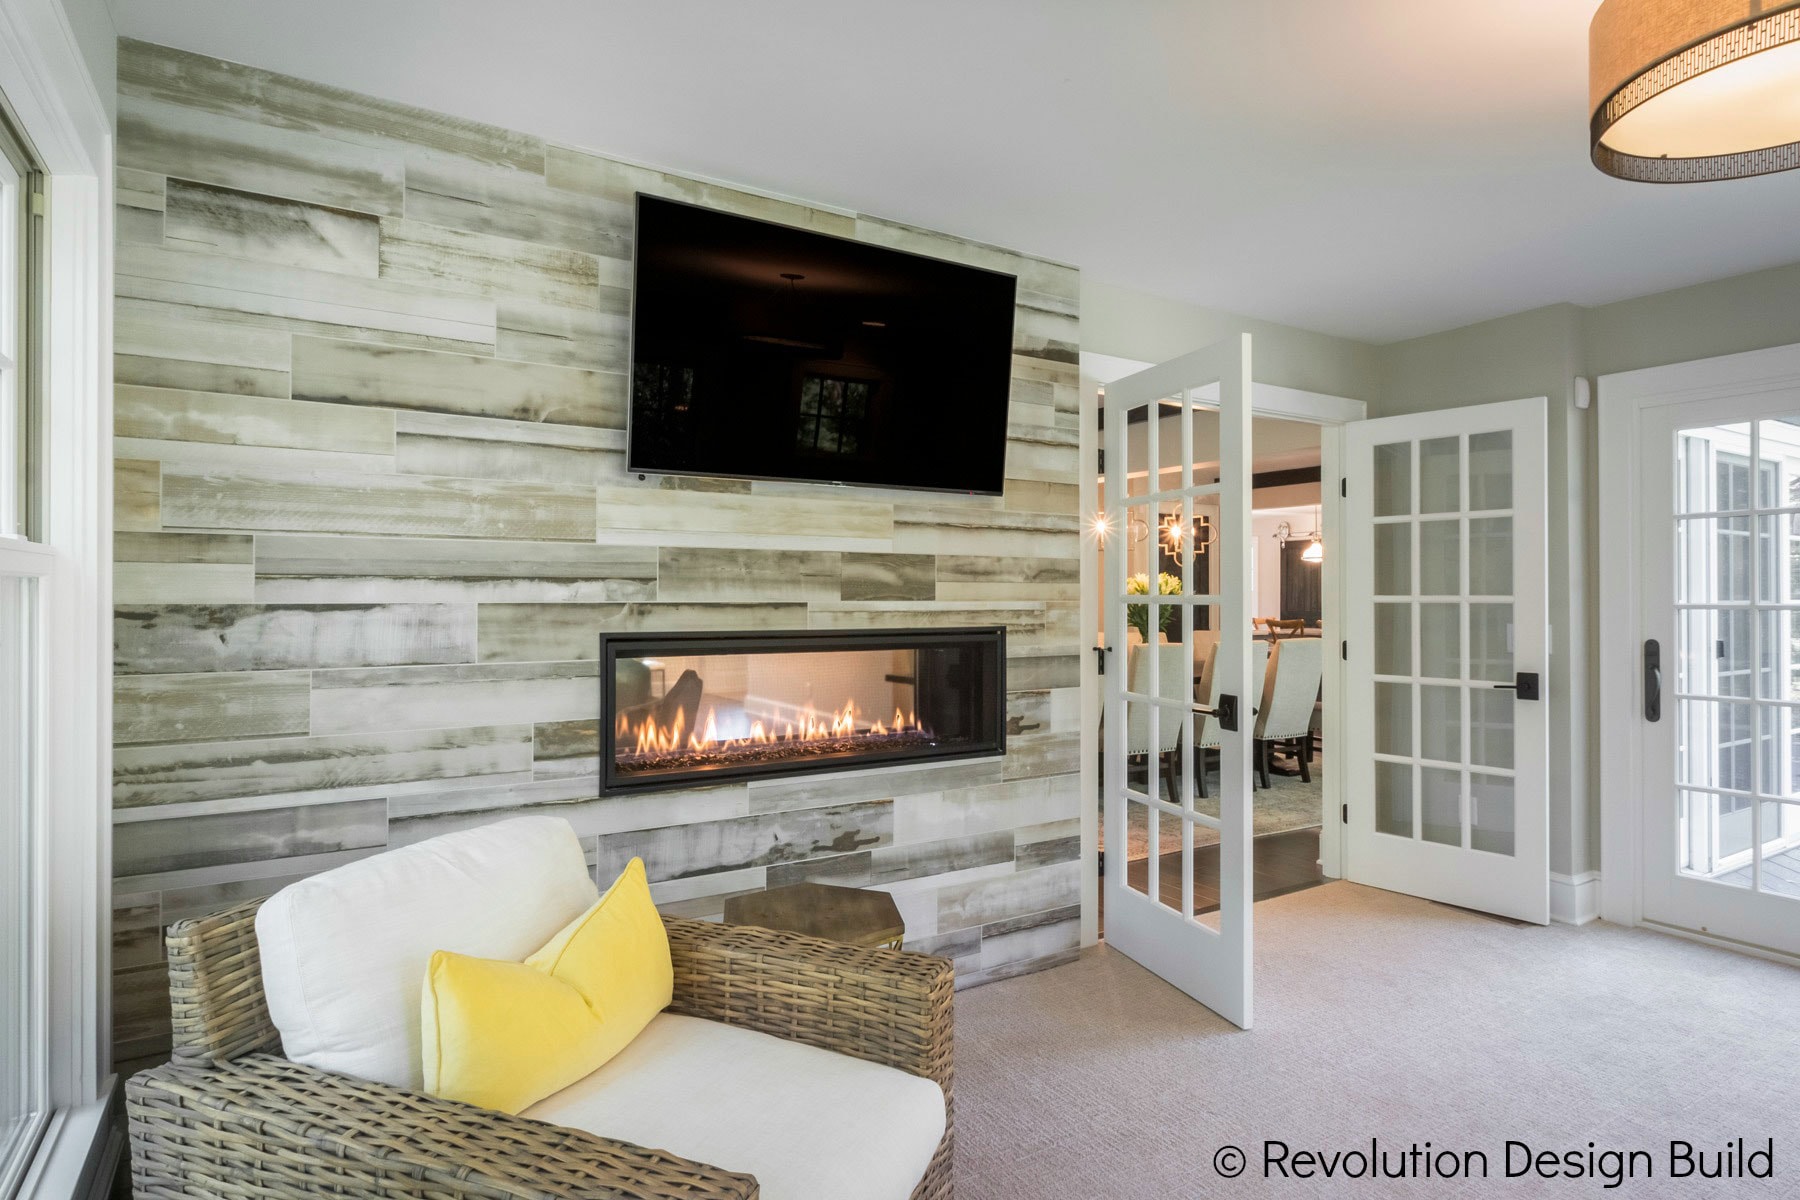 Small Electric Wall Fireplace Elegant Unique Fireplace Idea Gallery